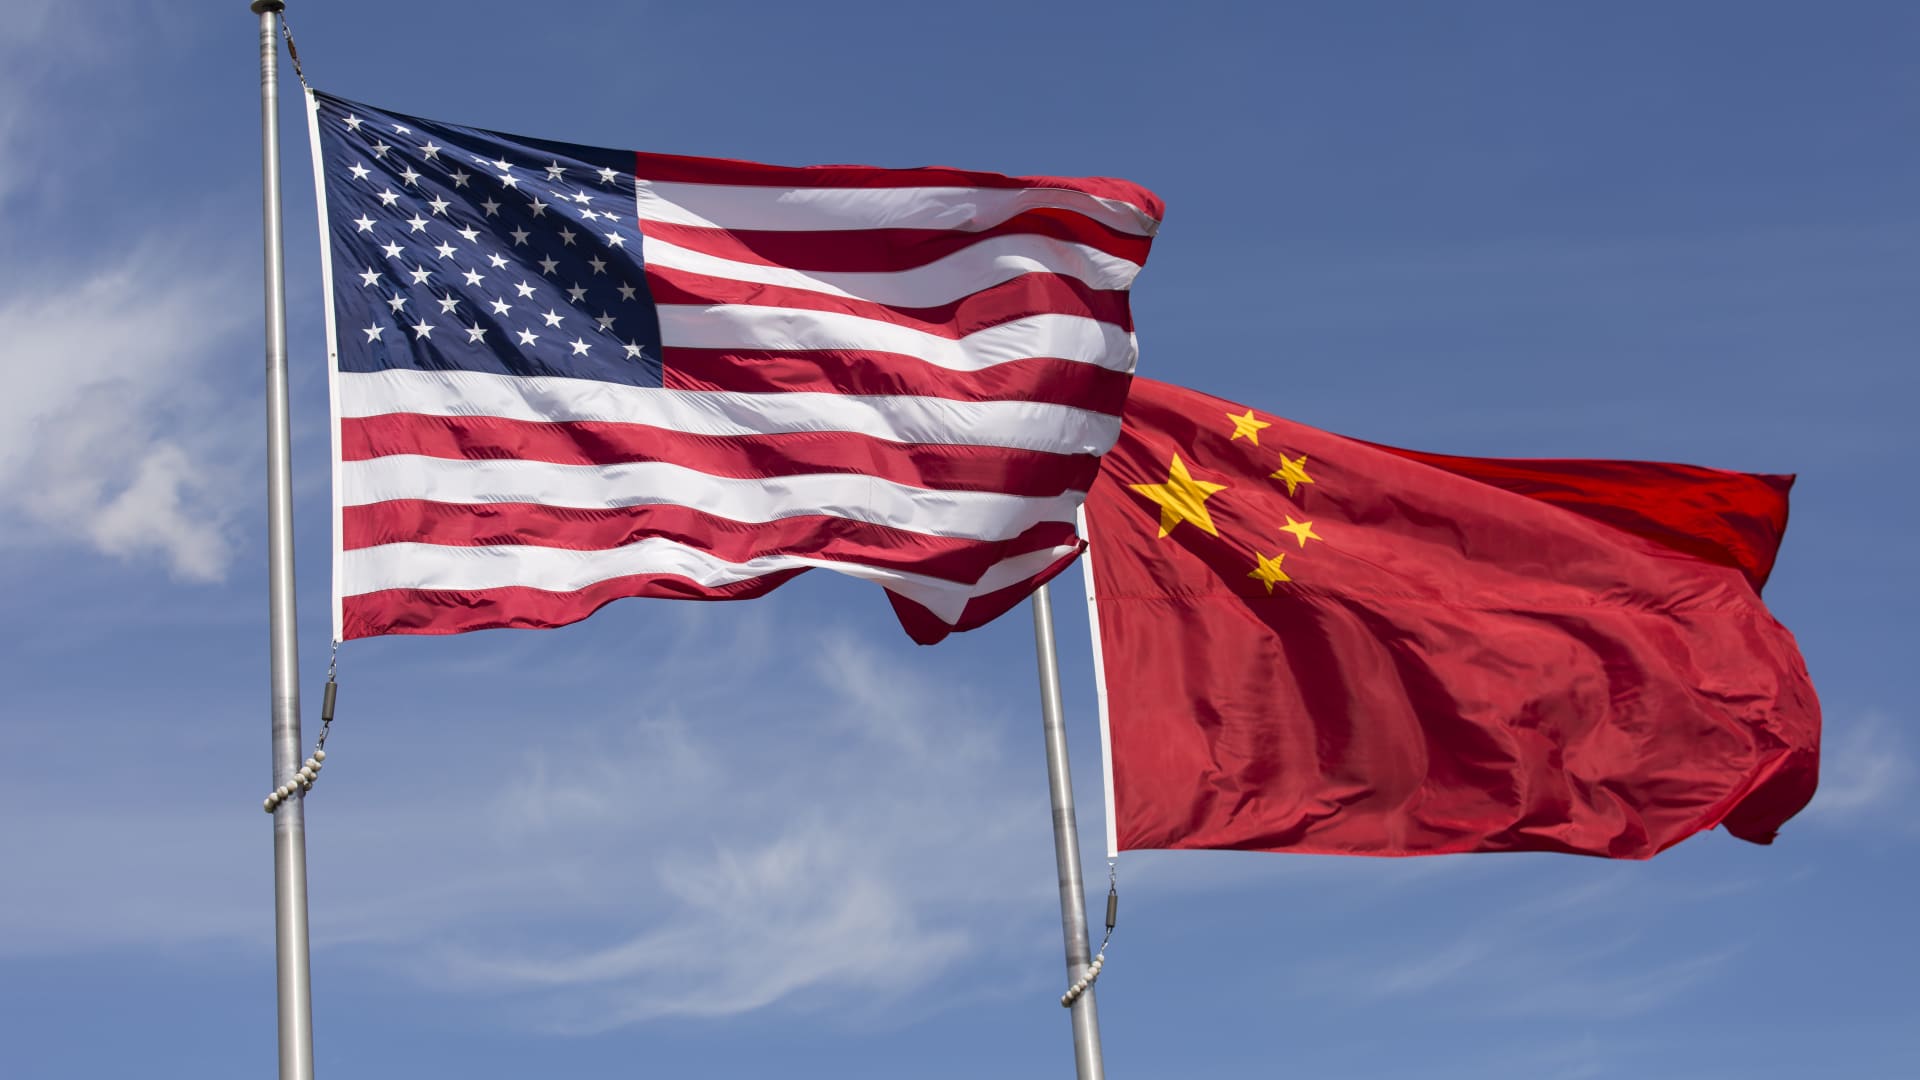 China is an enemy of the U.S. for a growing number of Americans, Pew poll shows